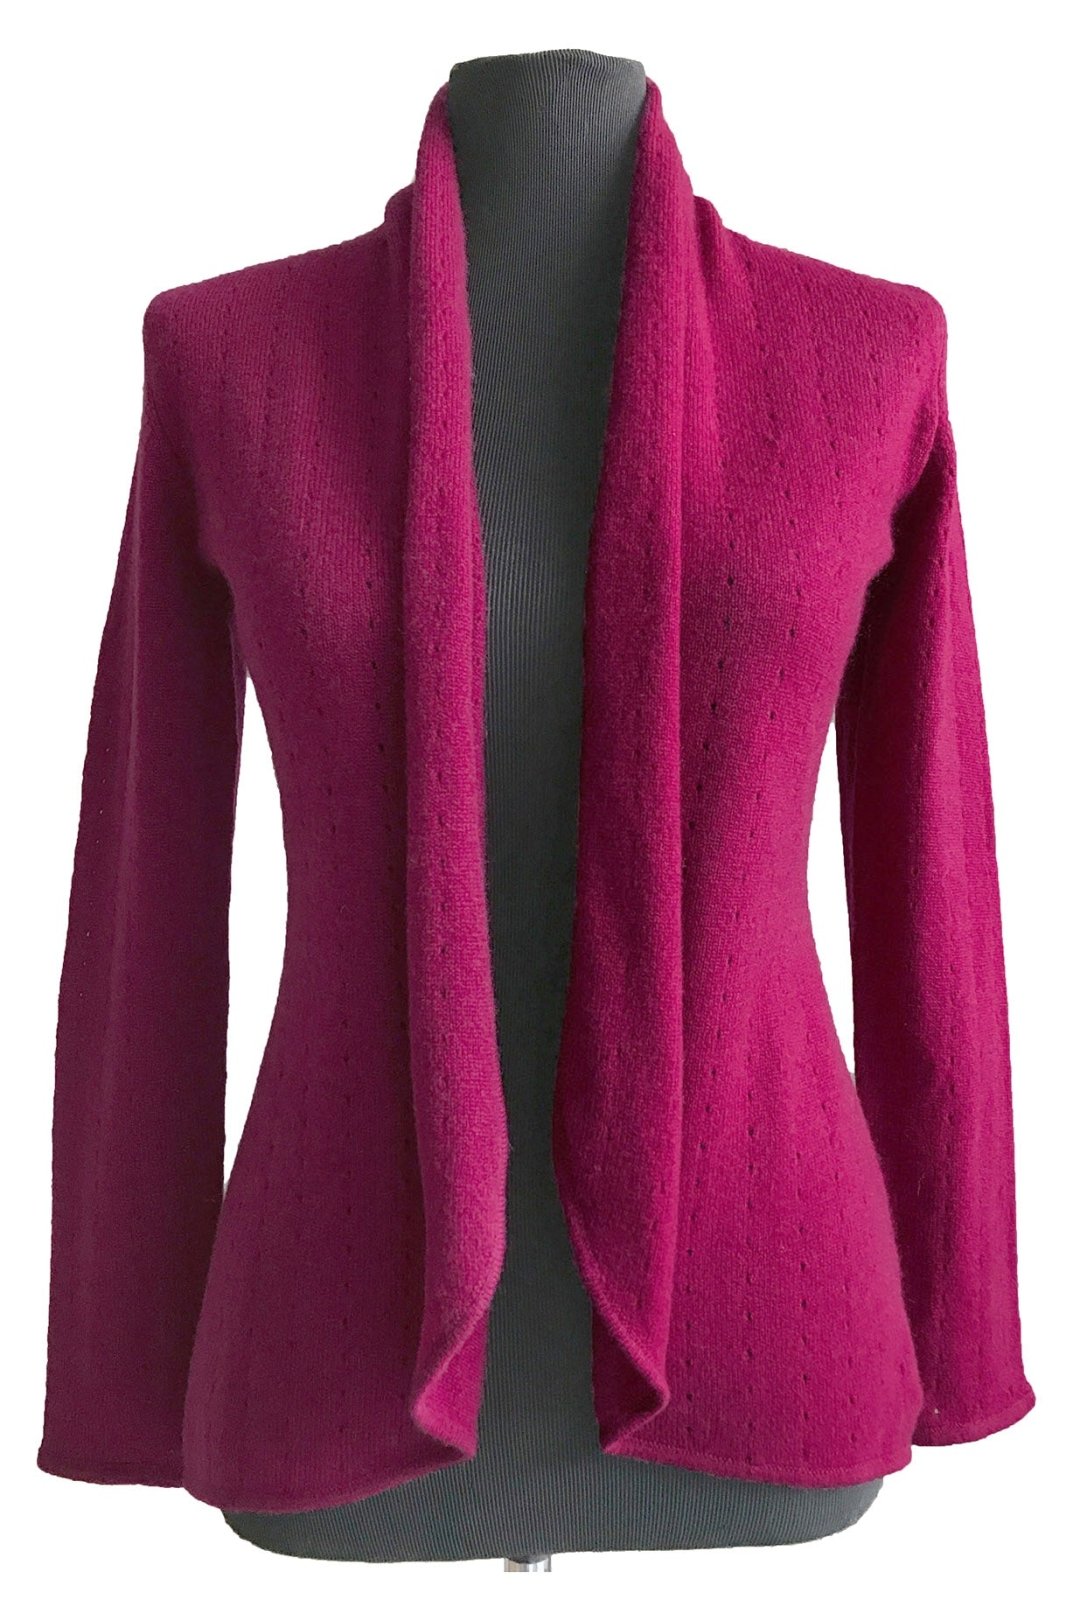 Lacy Cashmere cardigan in Cherry pink - SEMON Cashmere